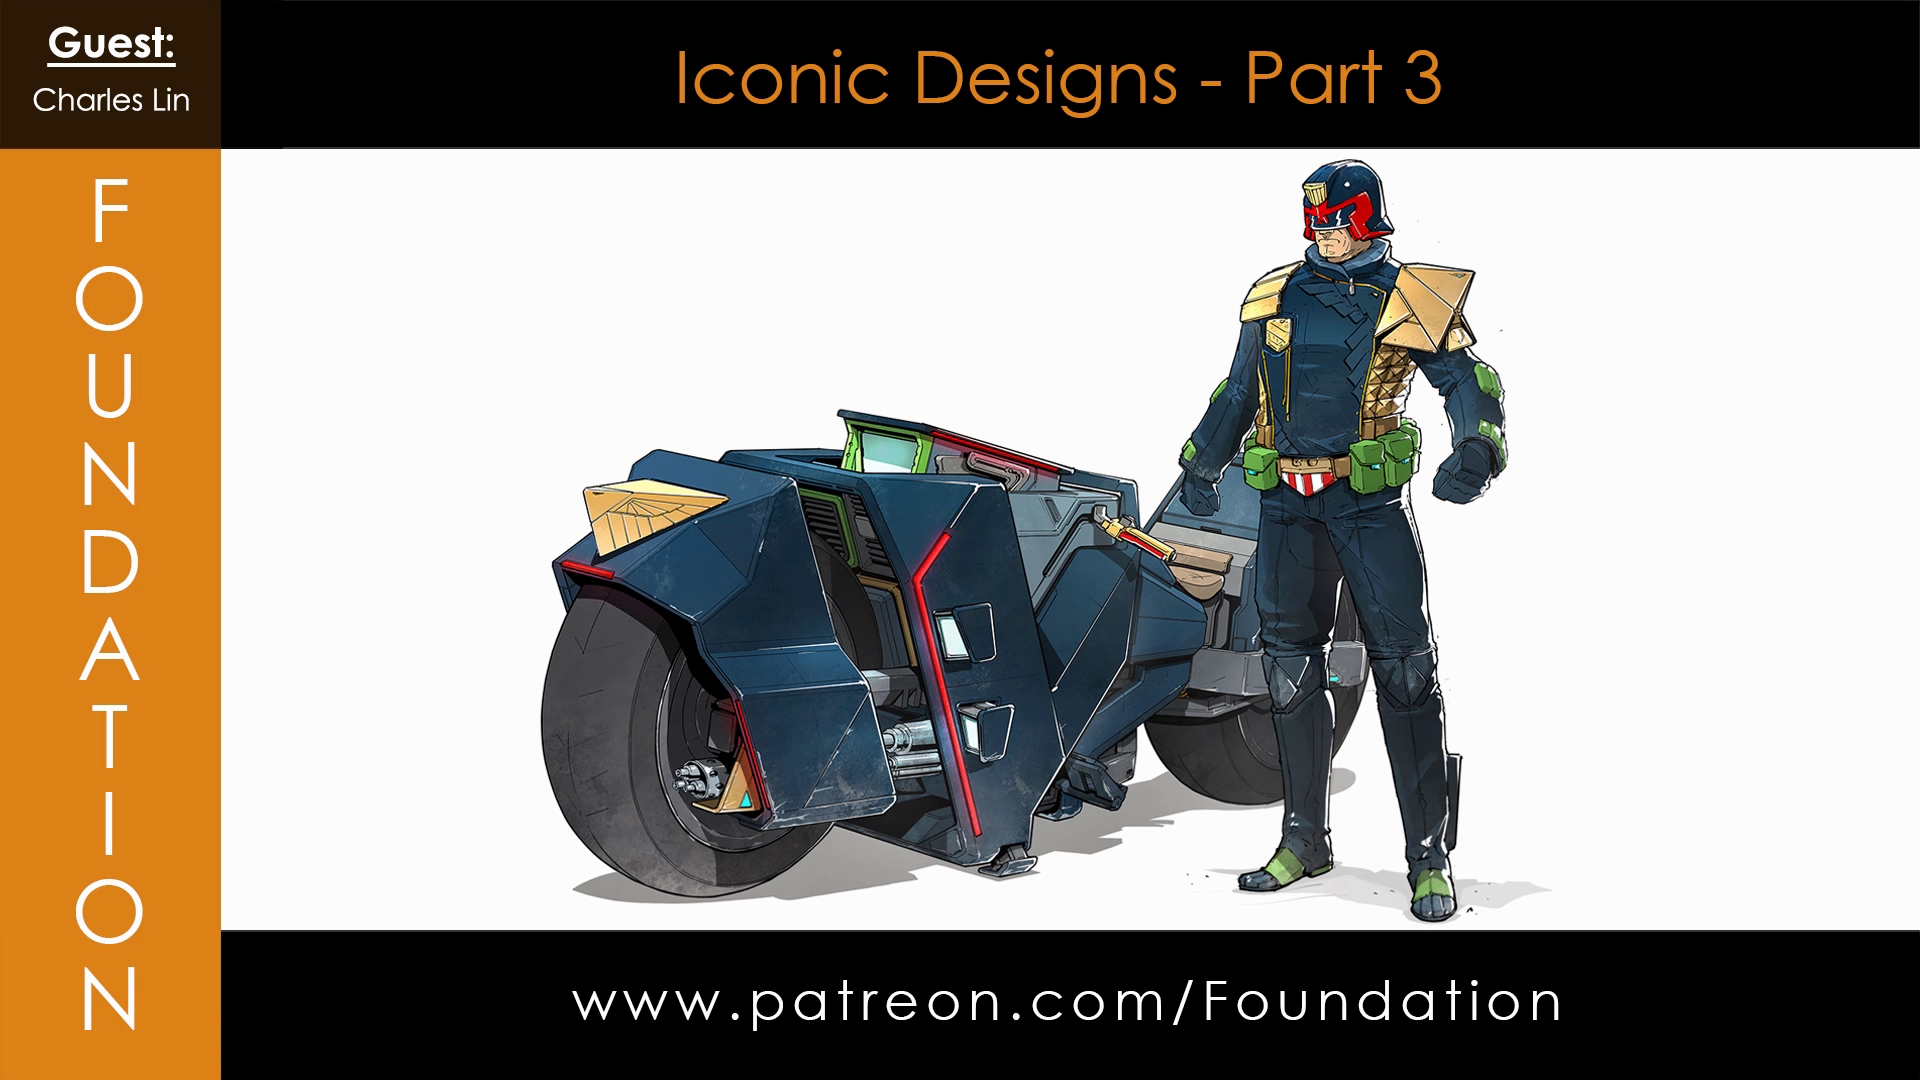 Iconic Designs Part 3 – with Charles Lin